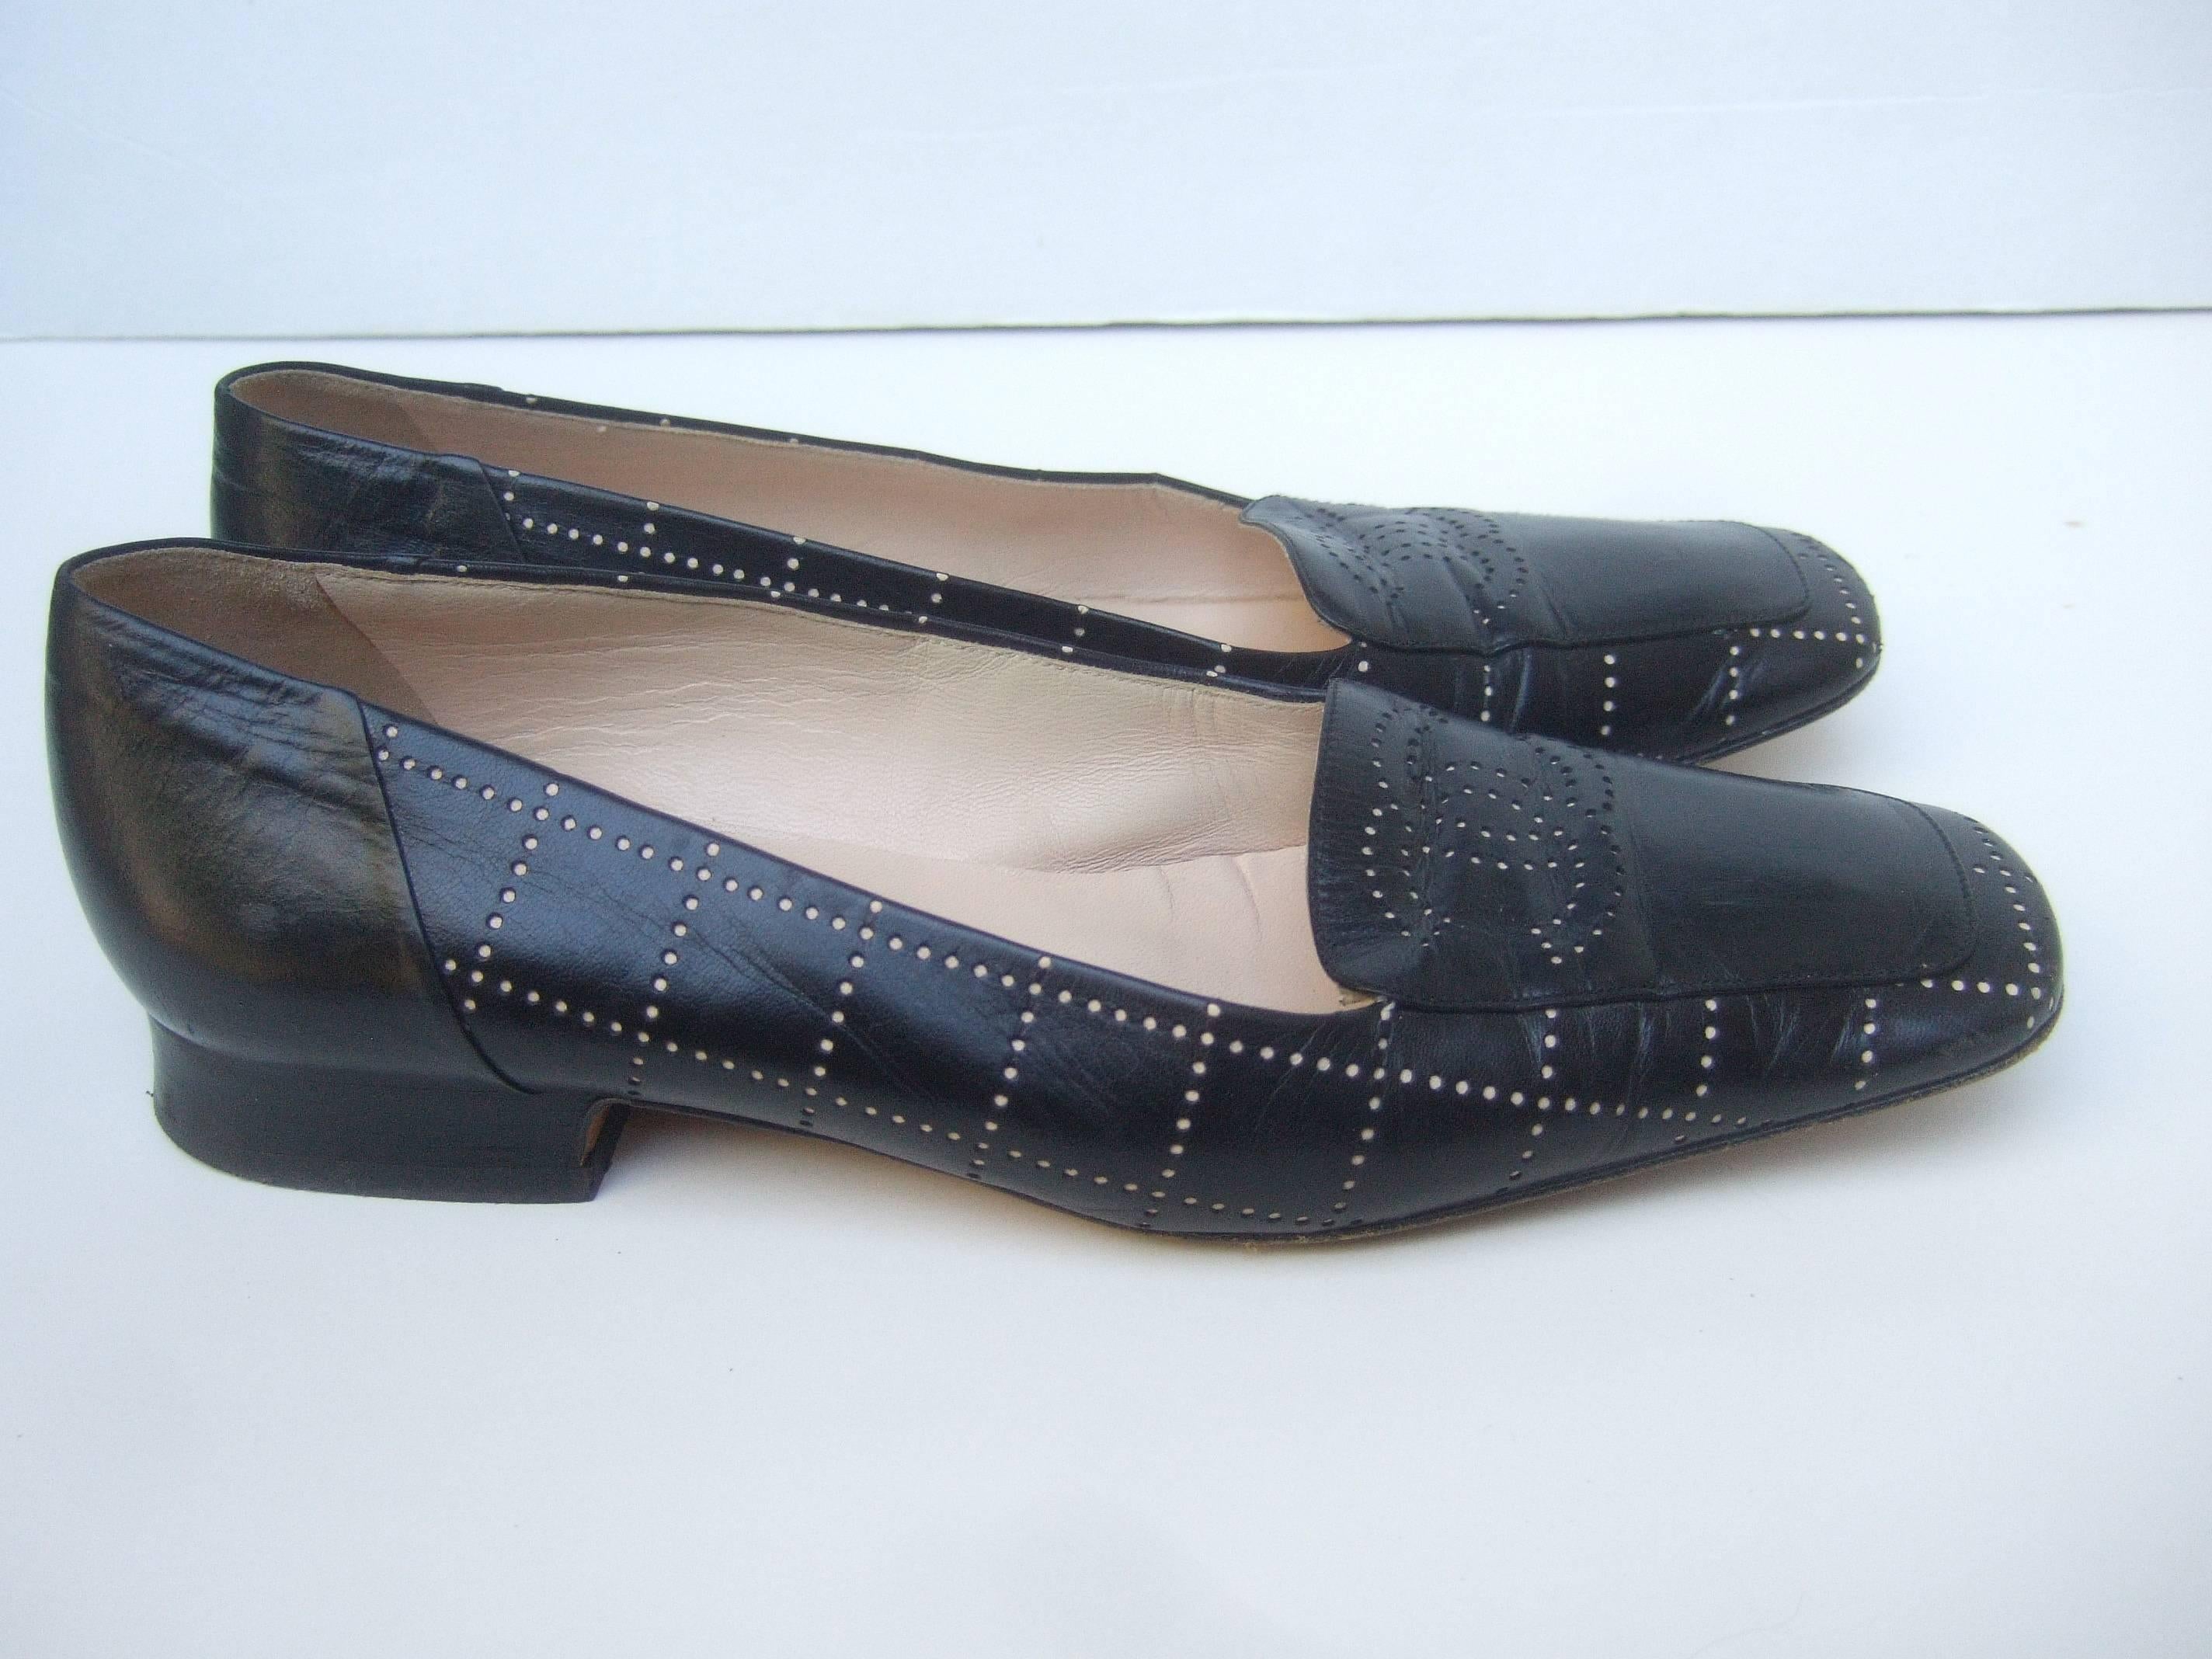 Chanel Stylish Black Leather Perforated Skimmer Flats Size 37.5 4